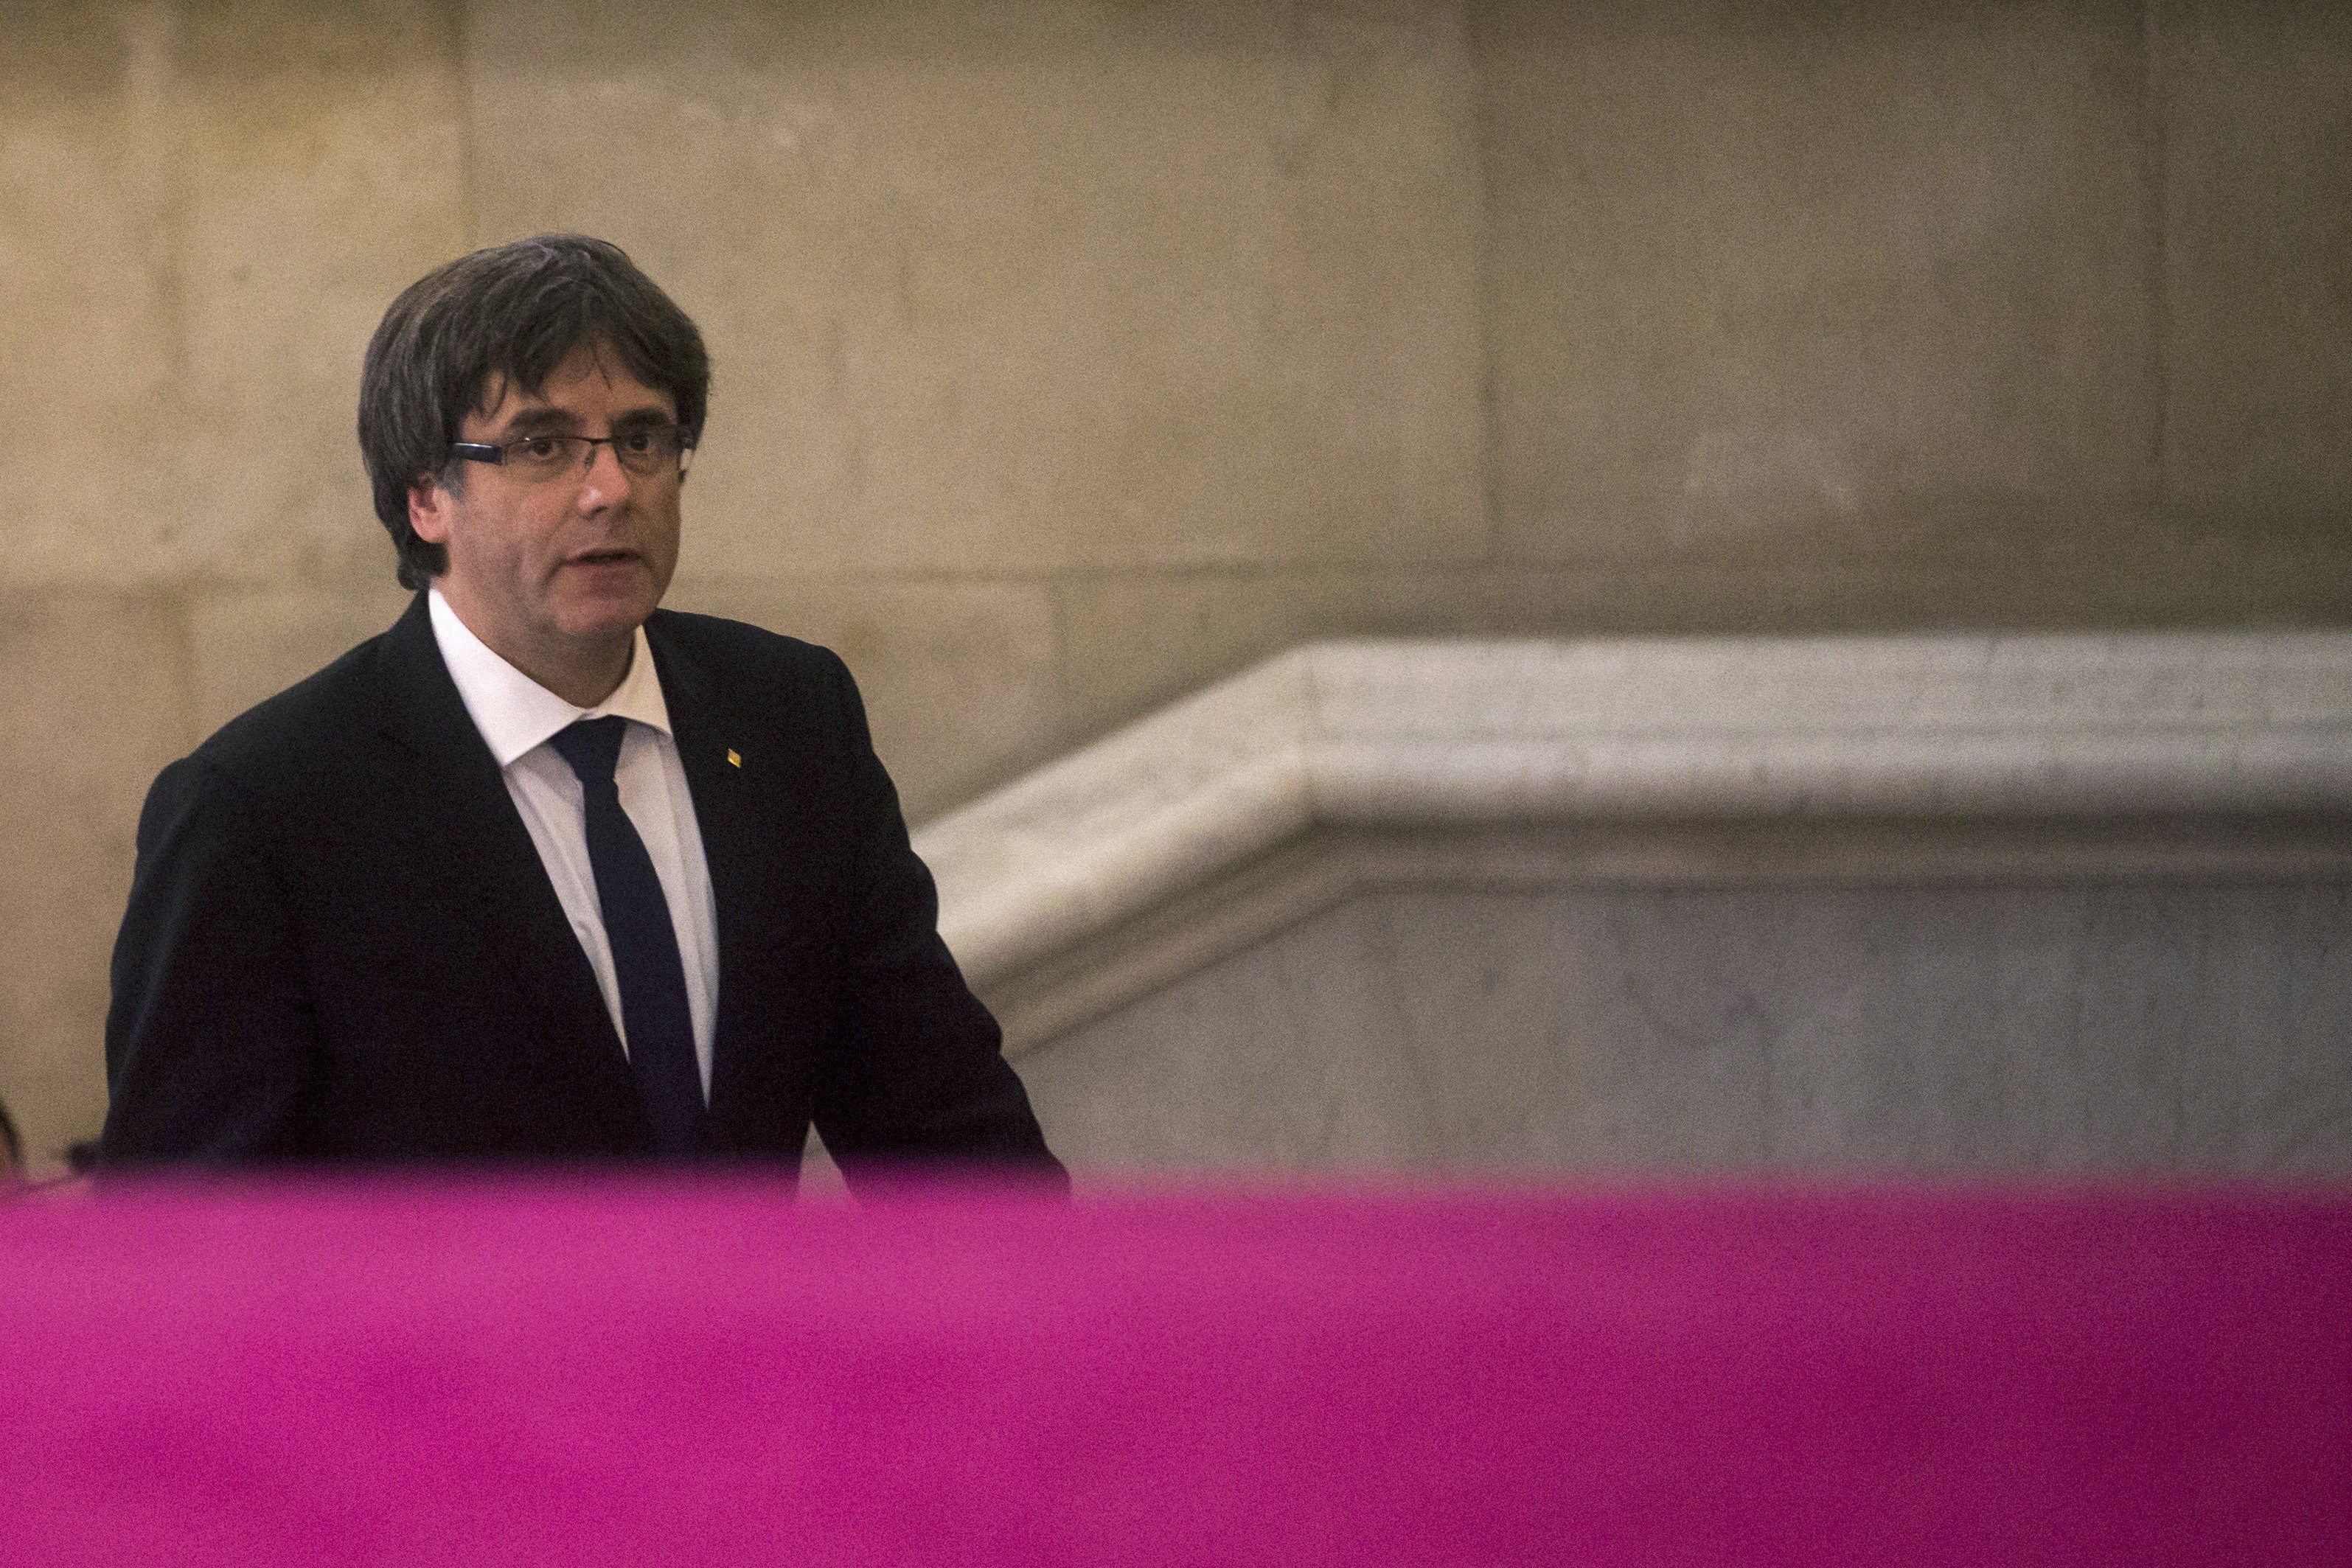 Puigdemont asks for appearance to be delayed an hour for last-minute international contacts